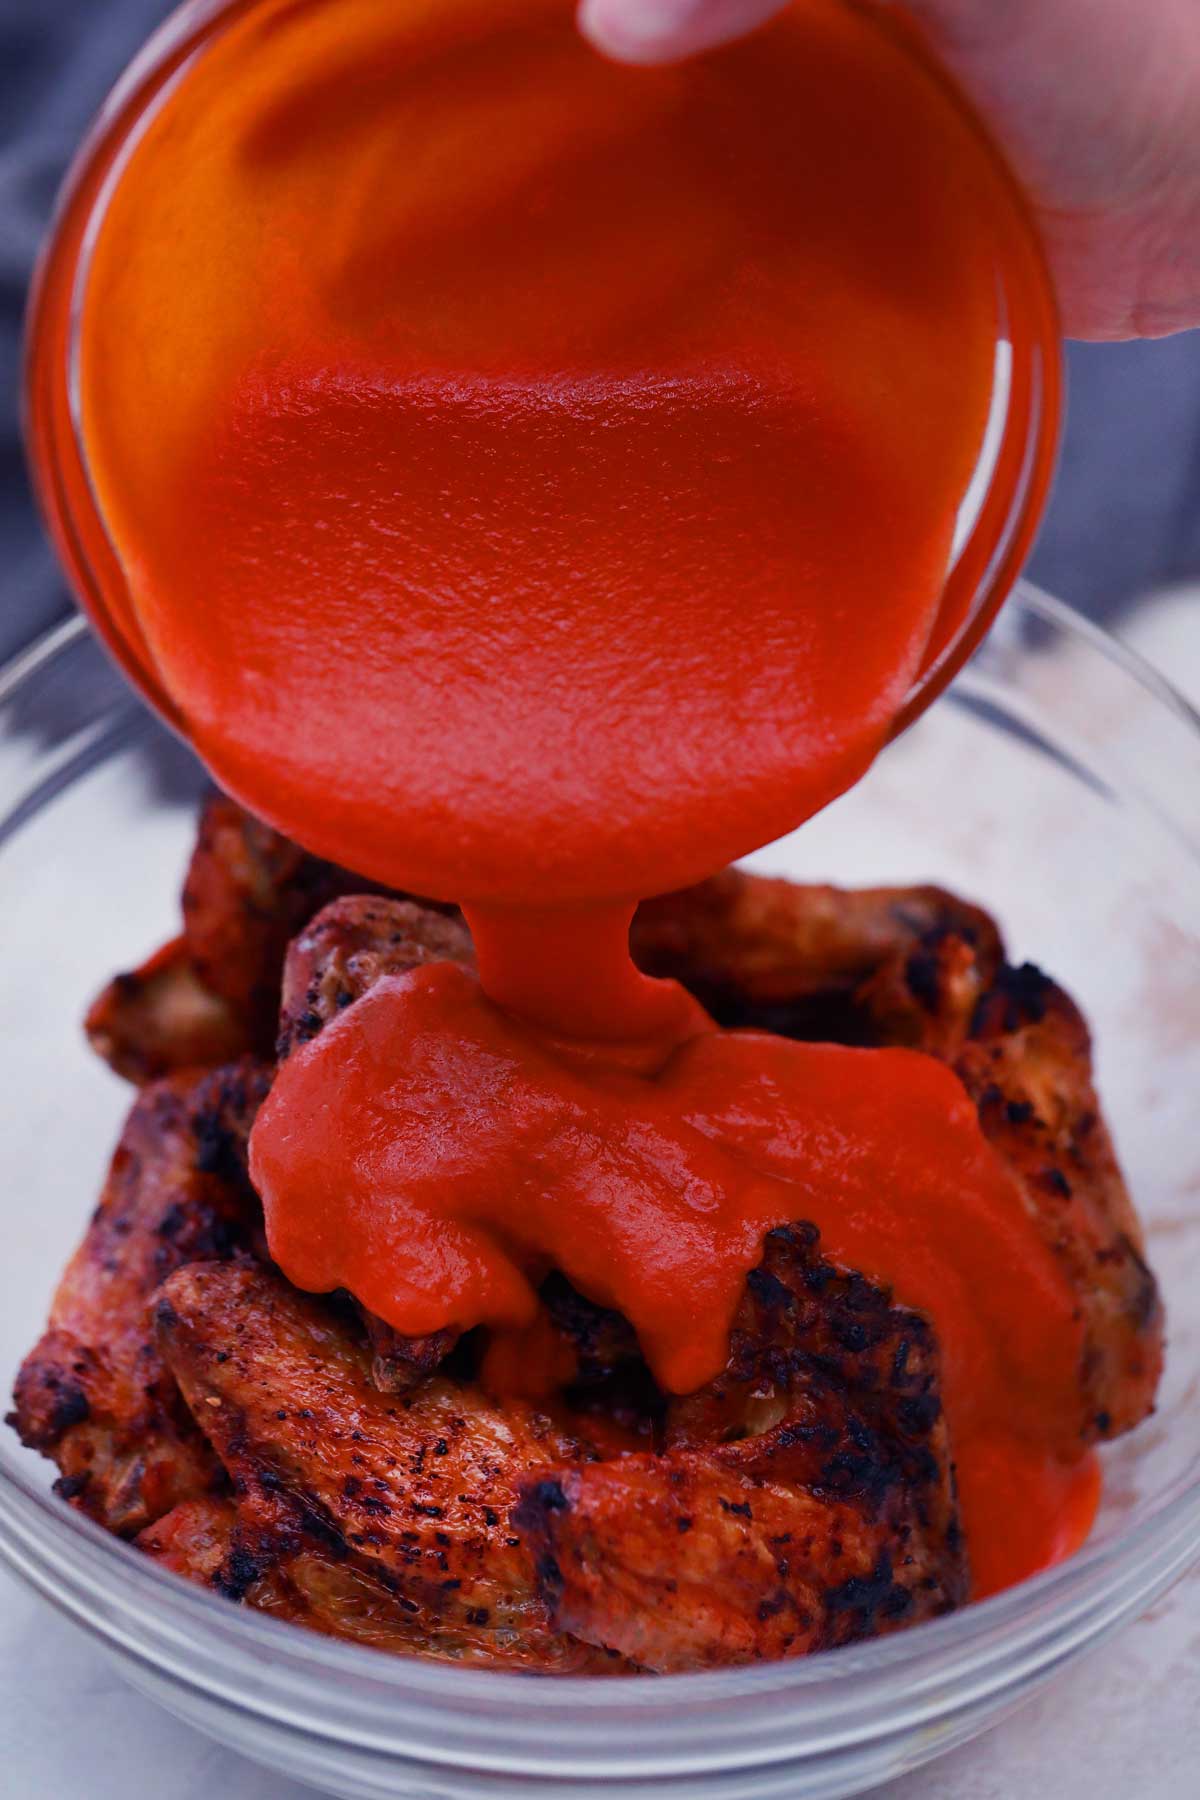 Pouring sauce on wings